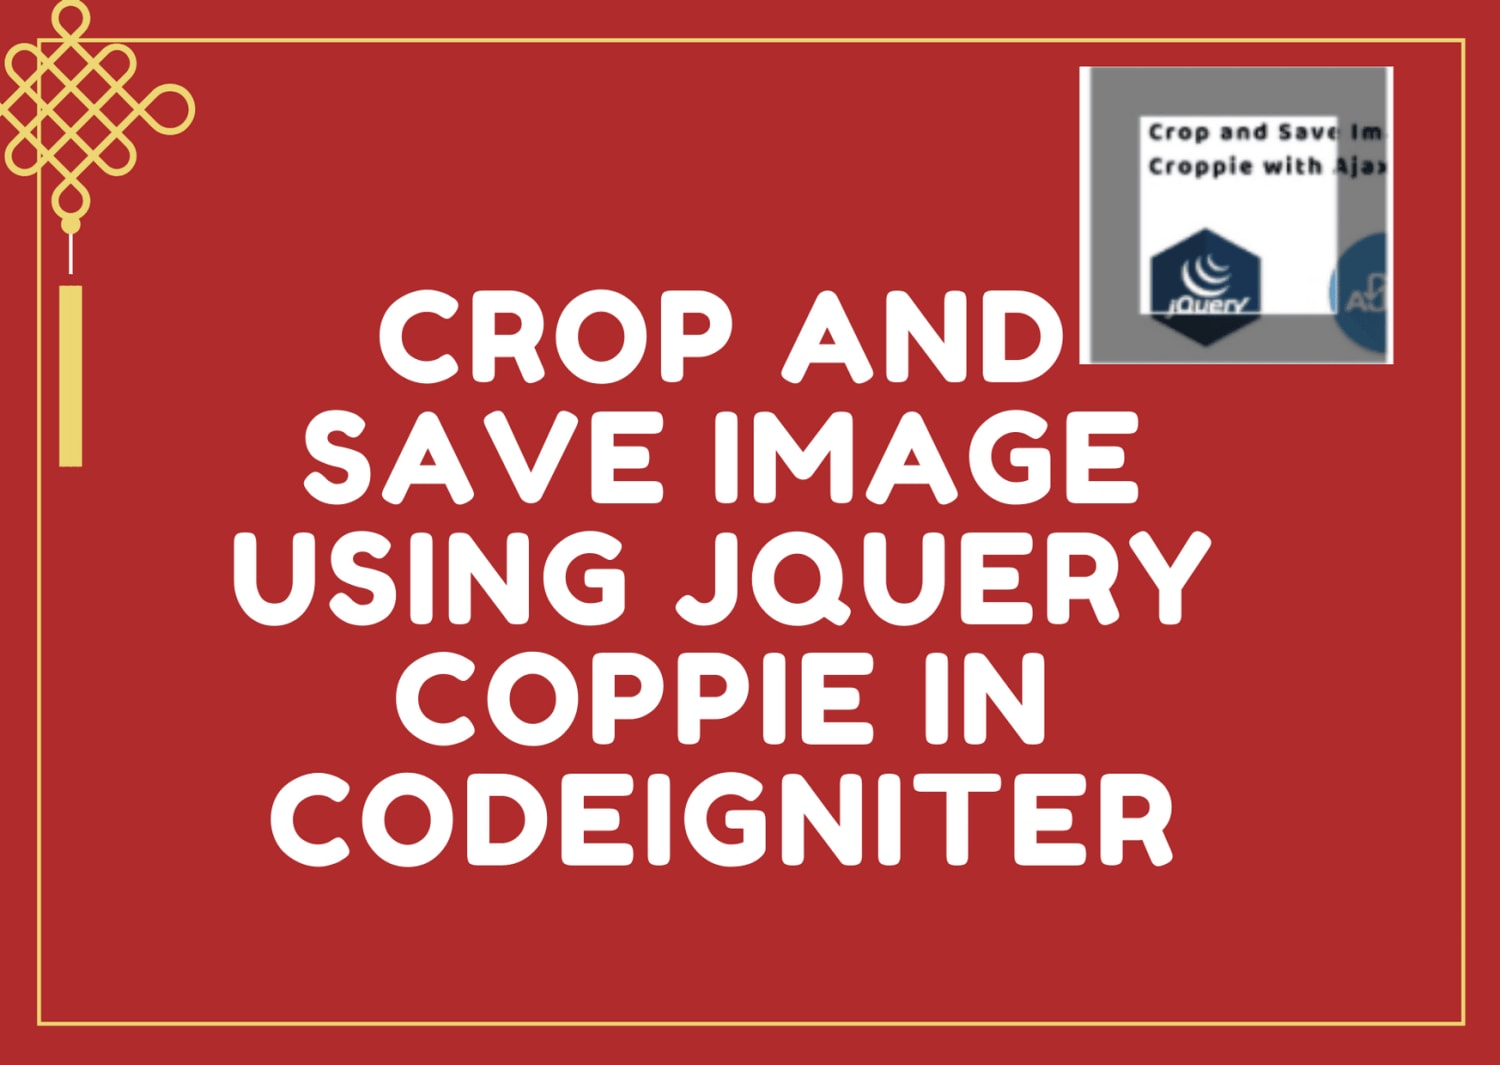 [Crop and Save] Image using jQuery Coppie in Codeigniter- Step by Step